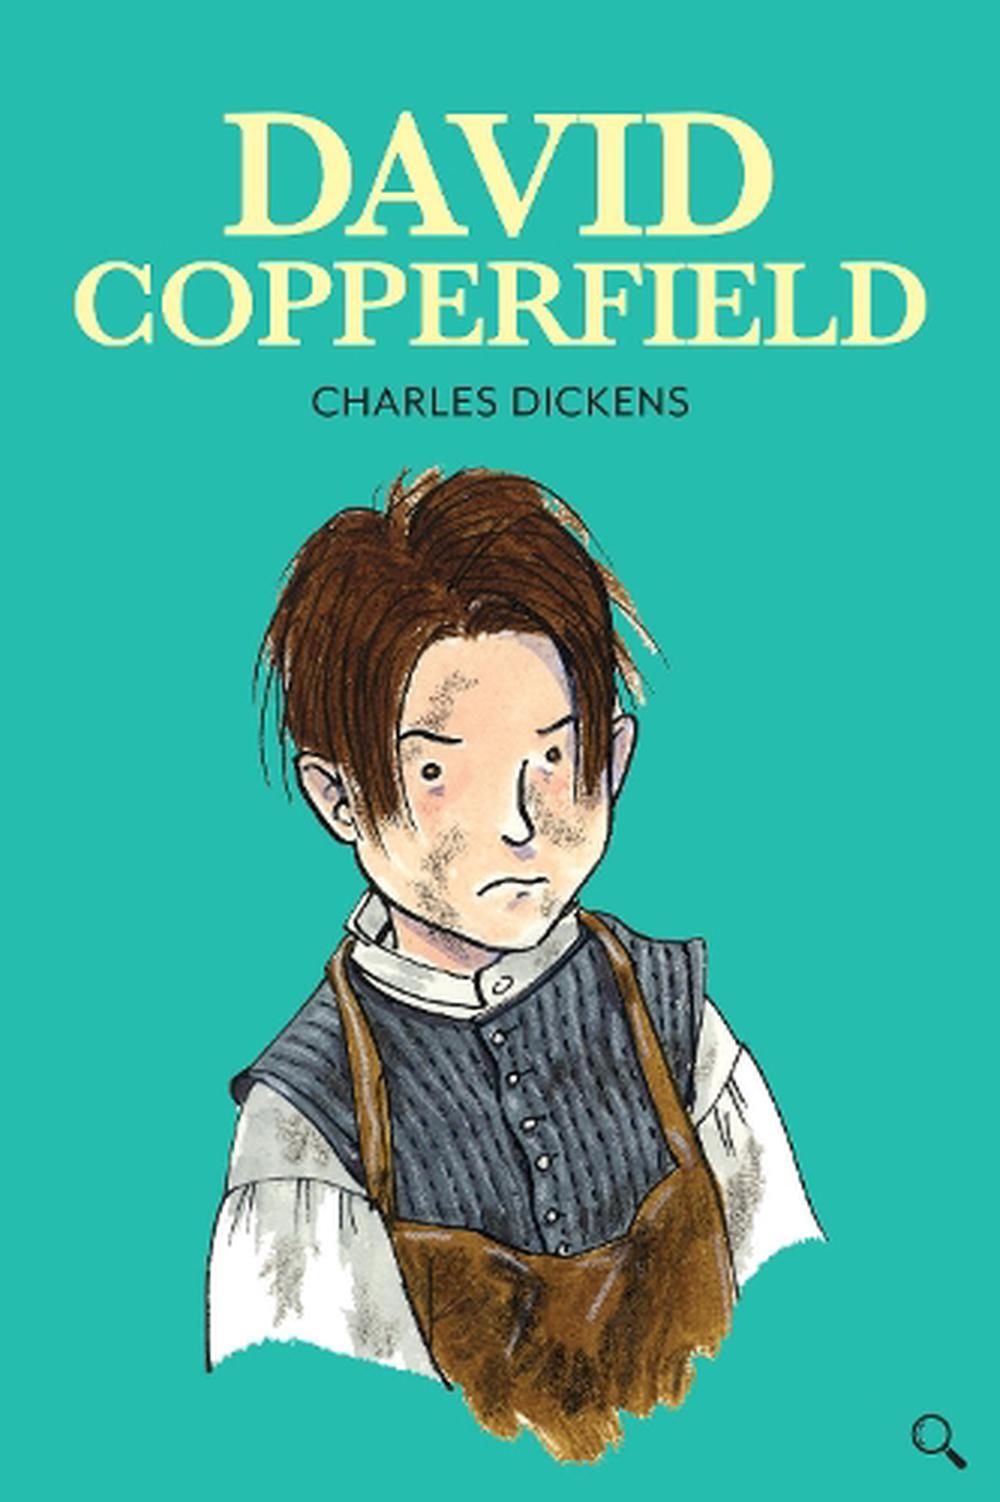 david copperfield charles dickens